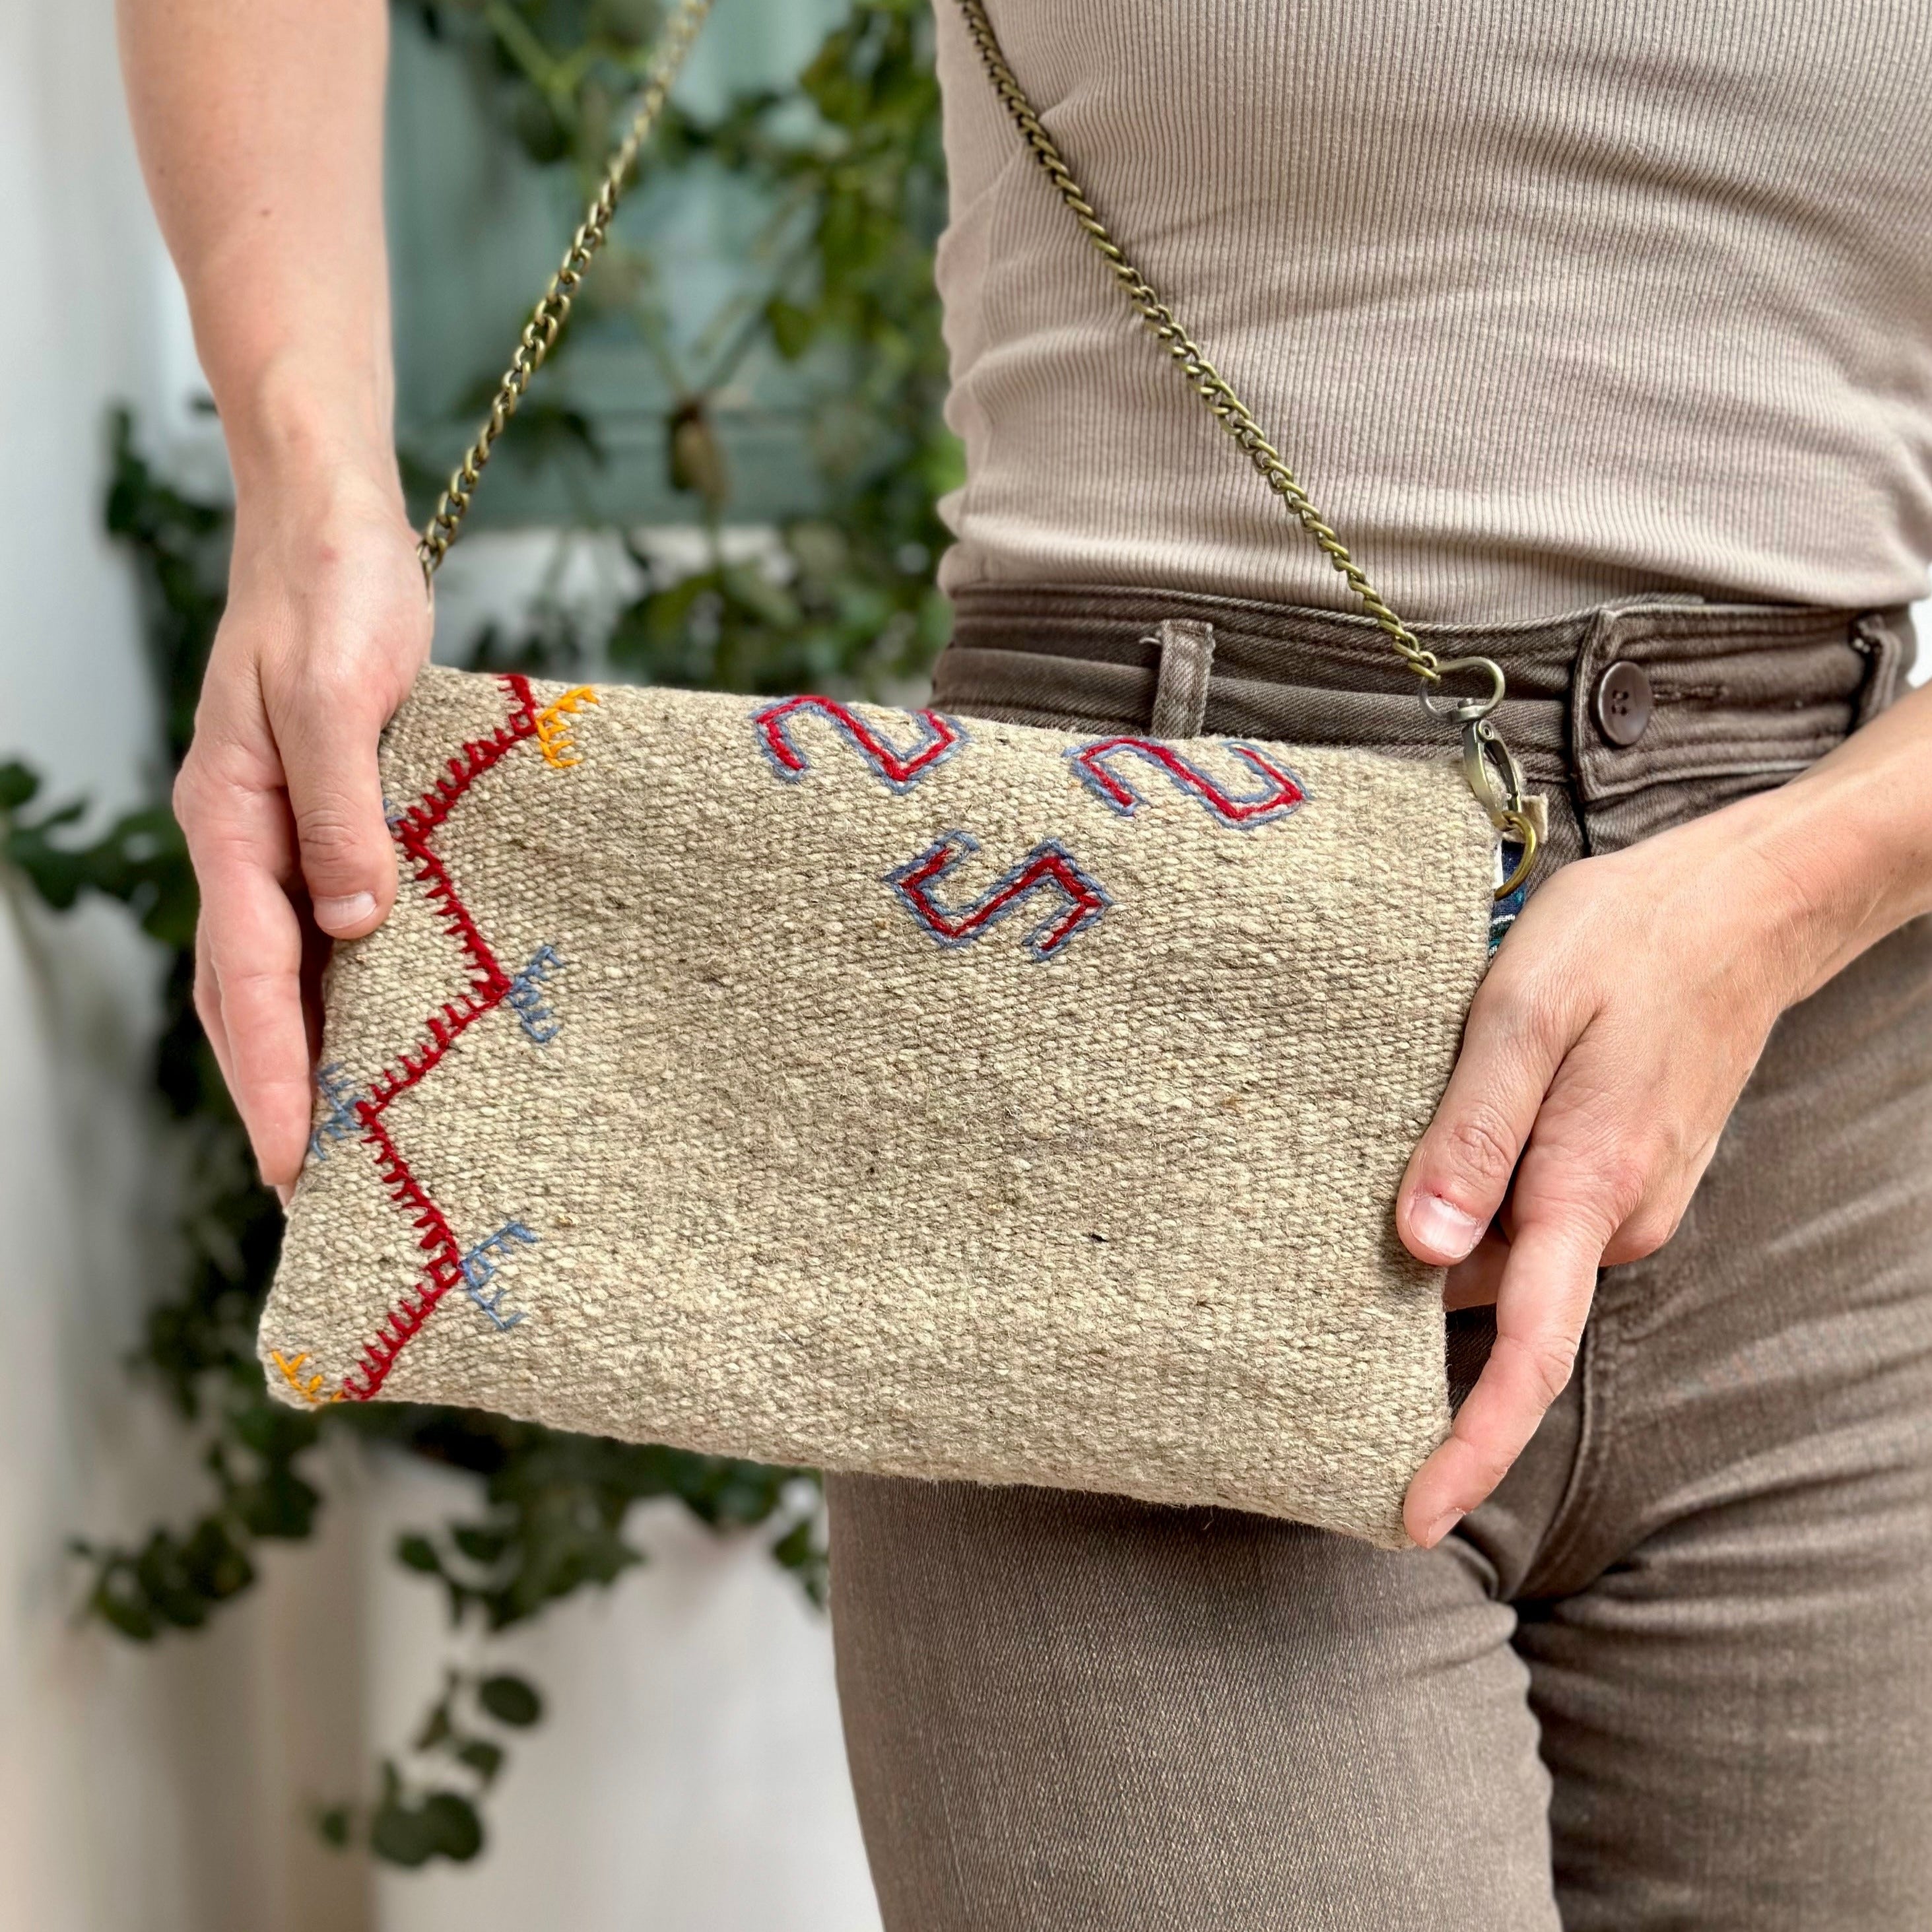 Terra Upcycled Clutch